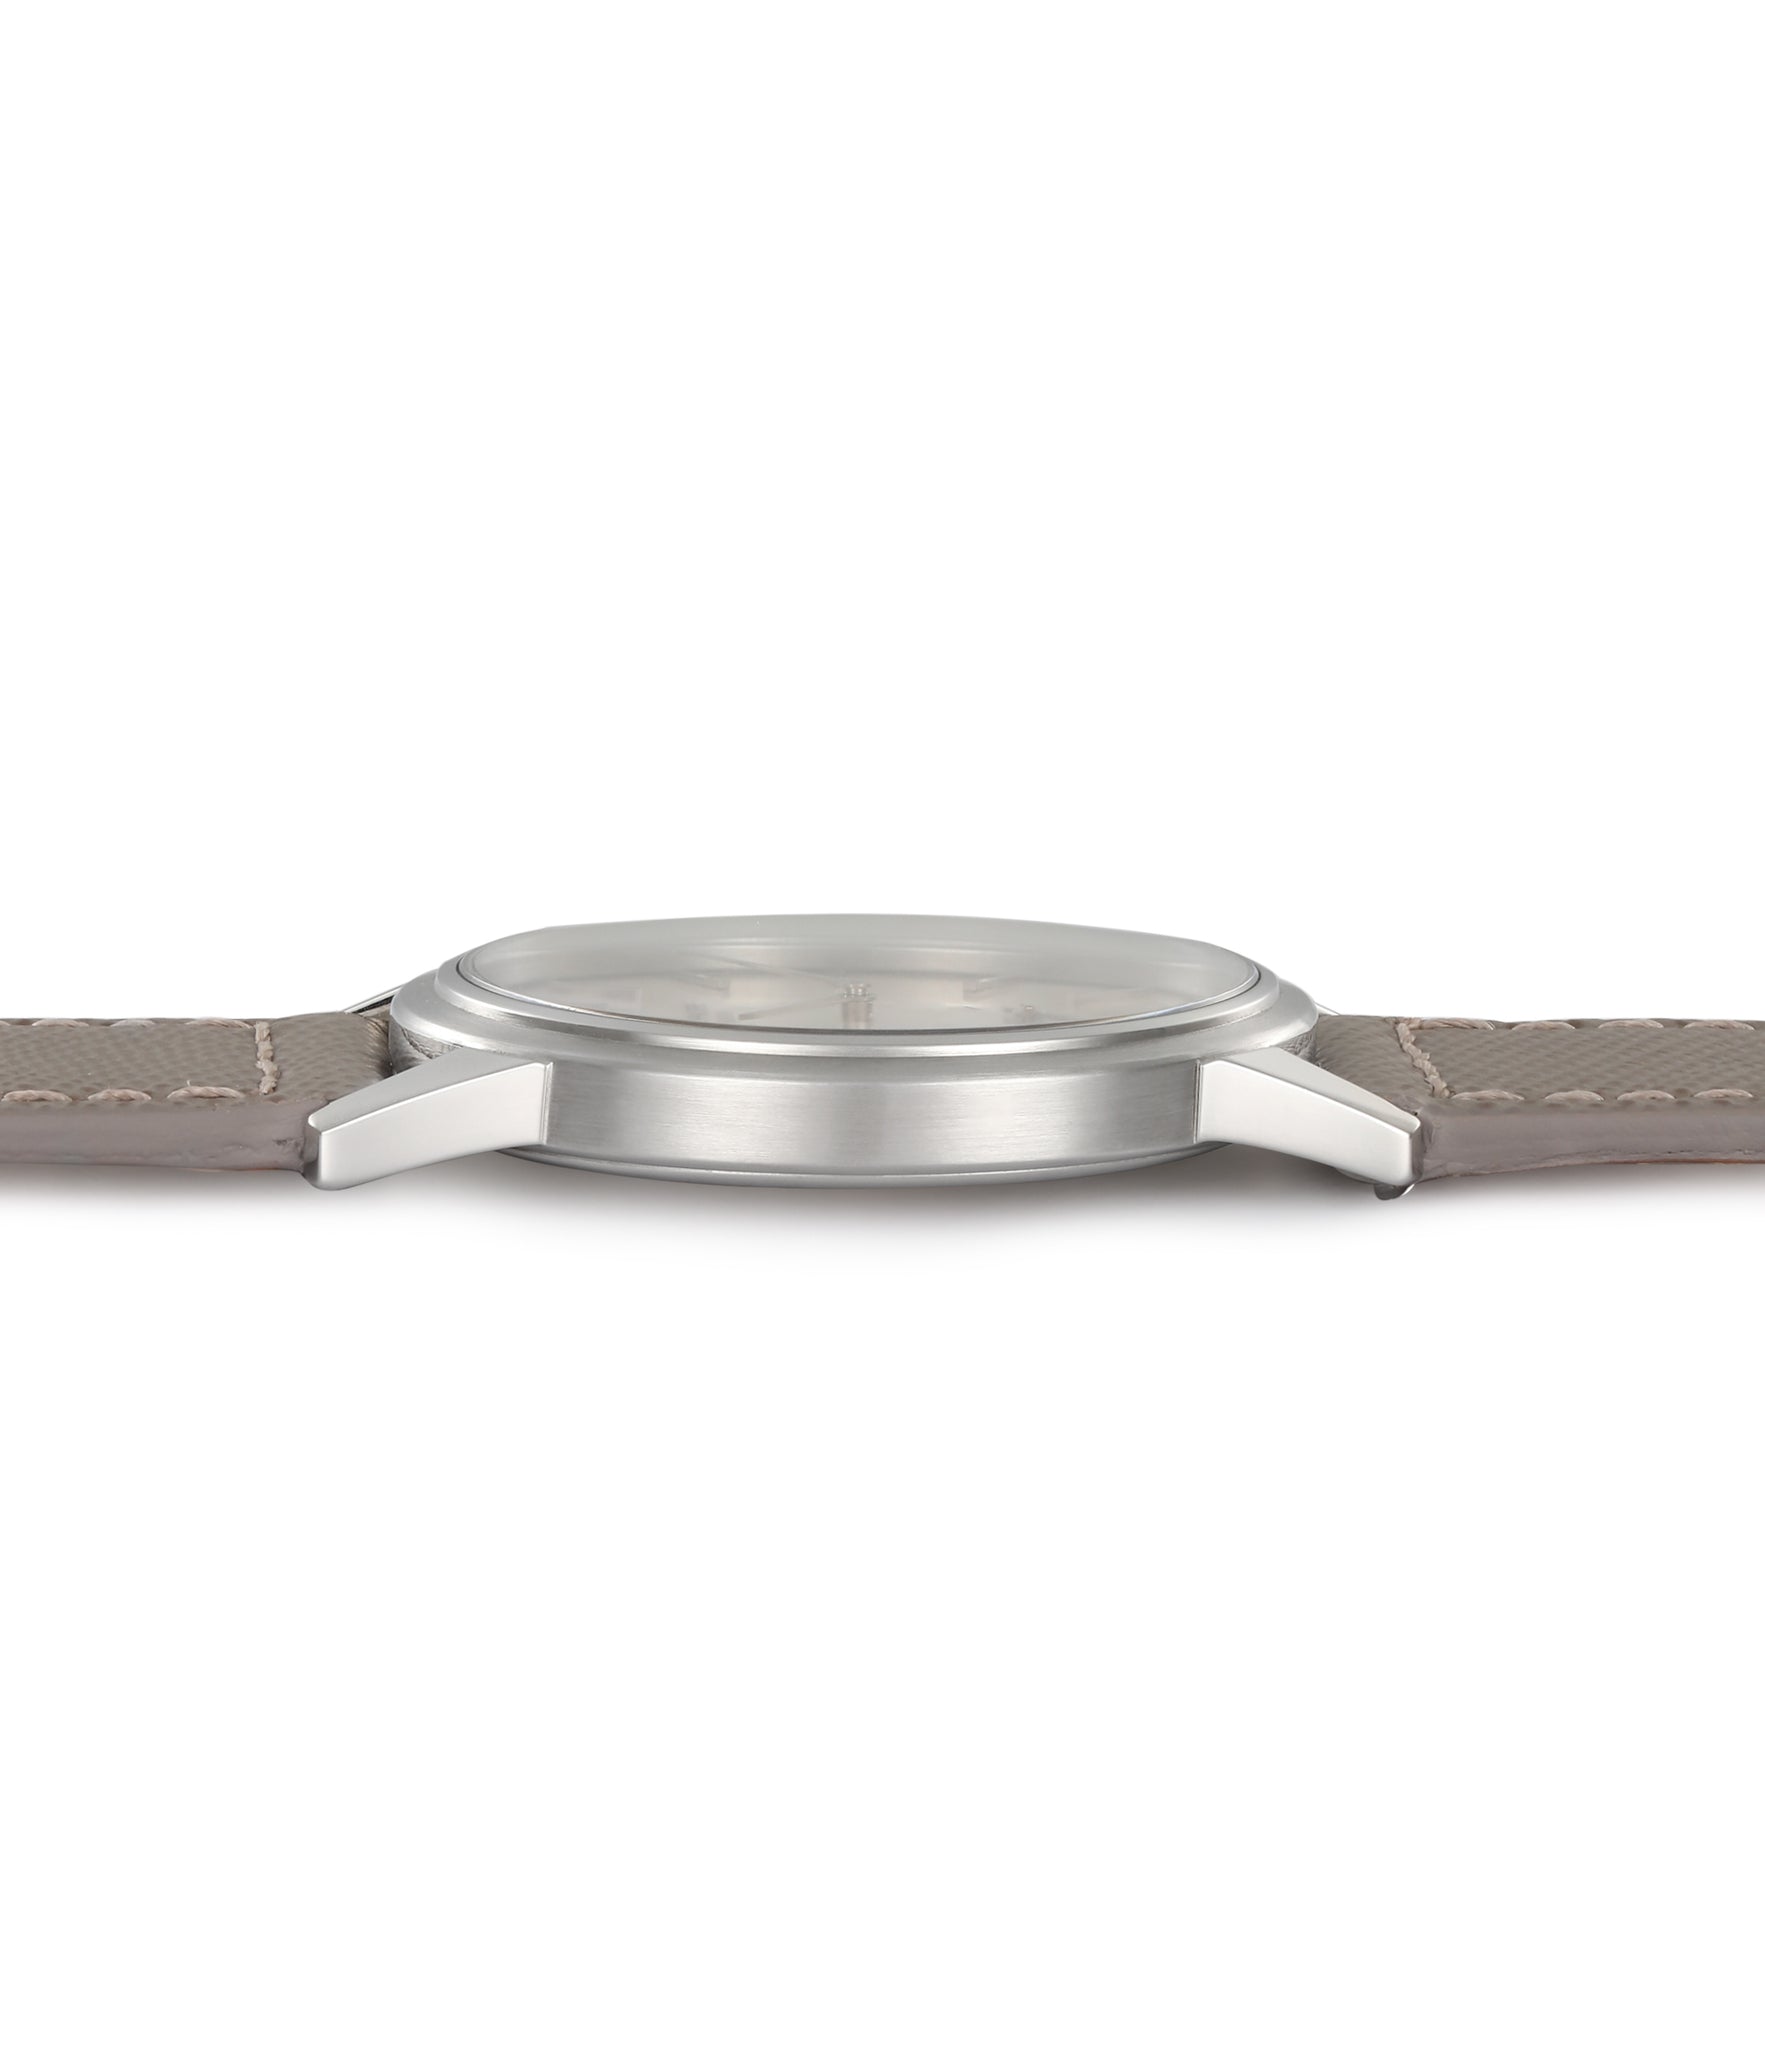 Calatrava Reference 3718 | Stainless Steel